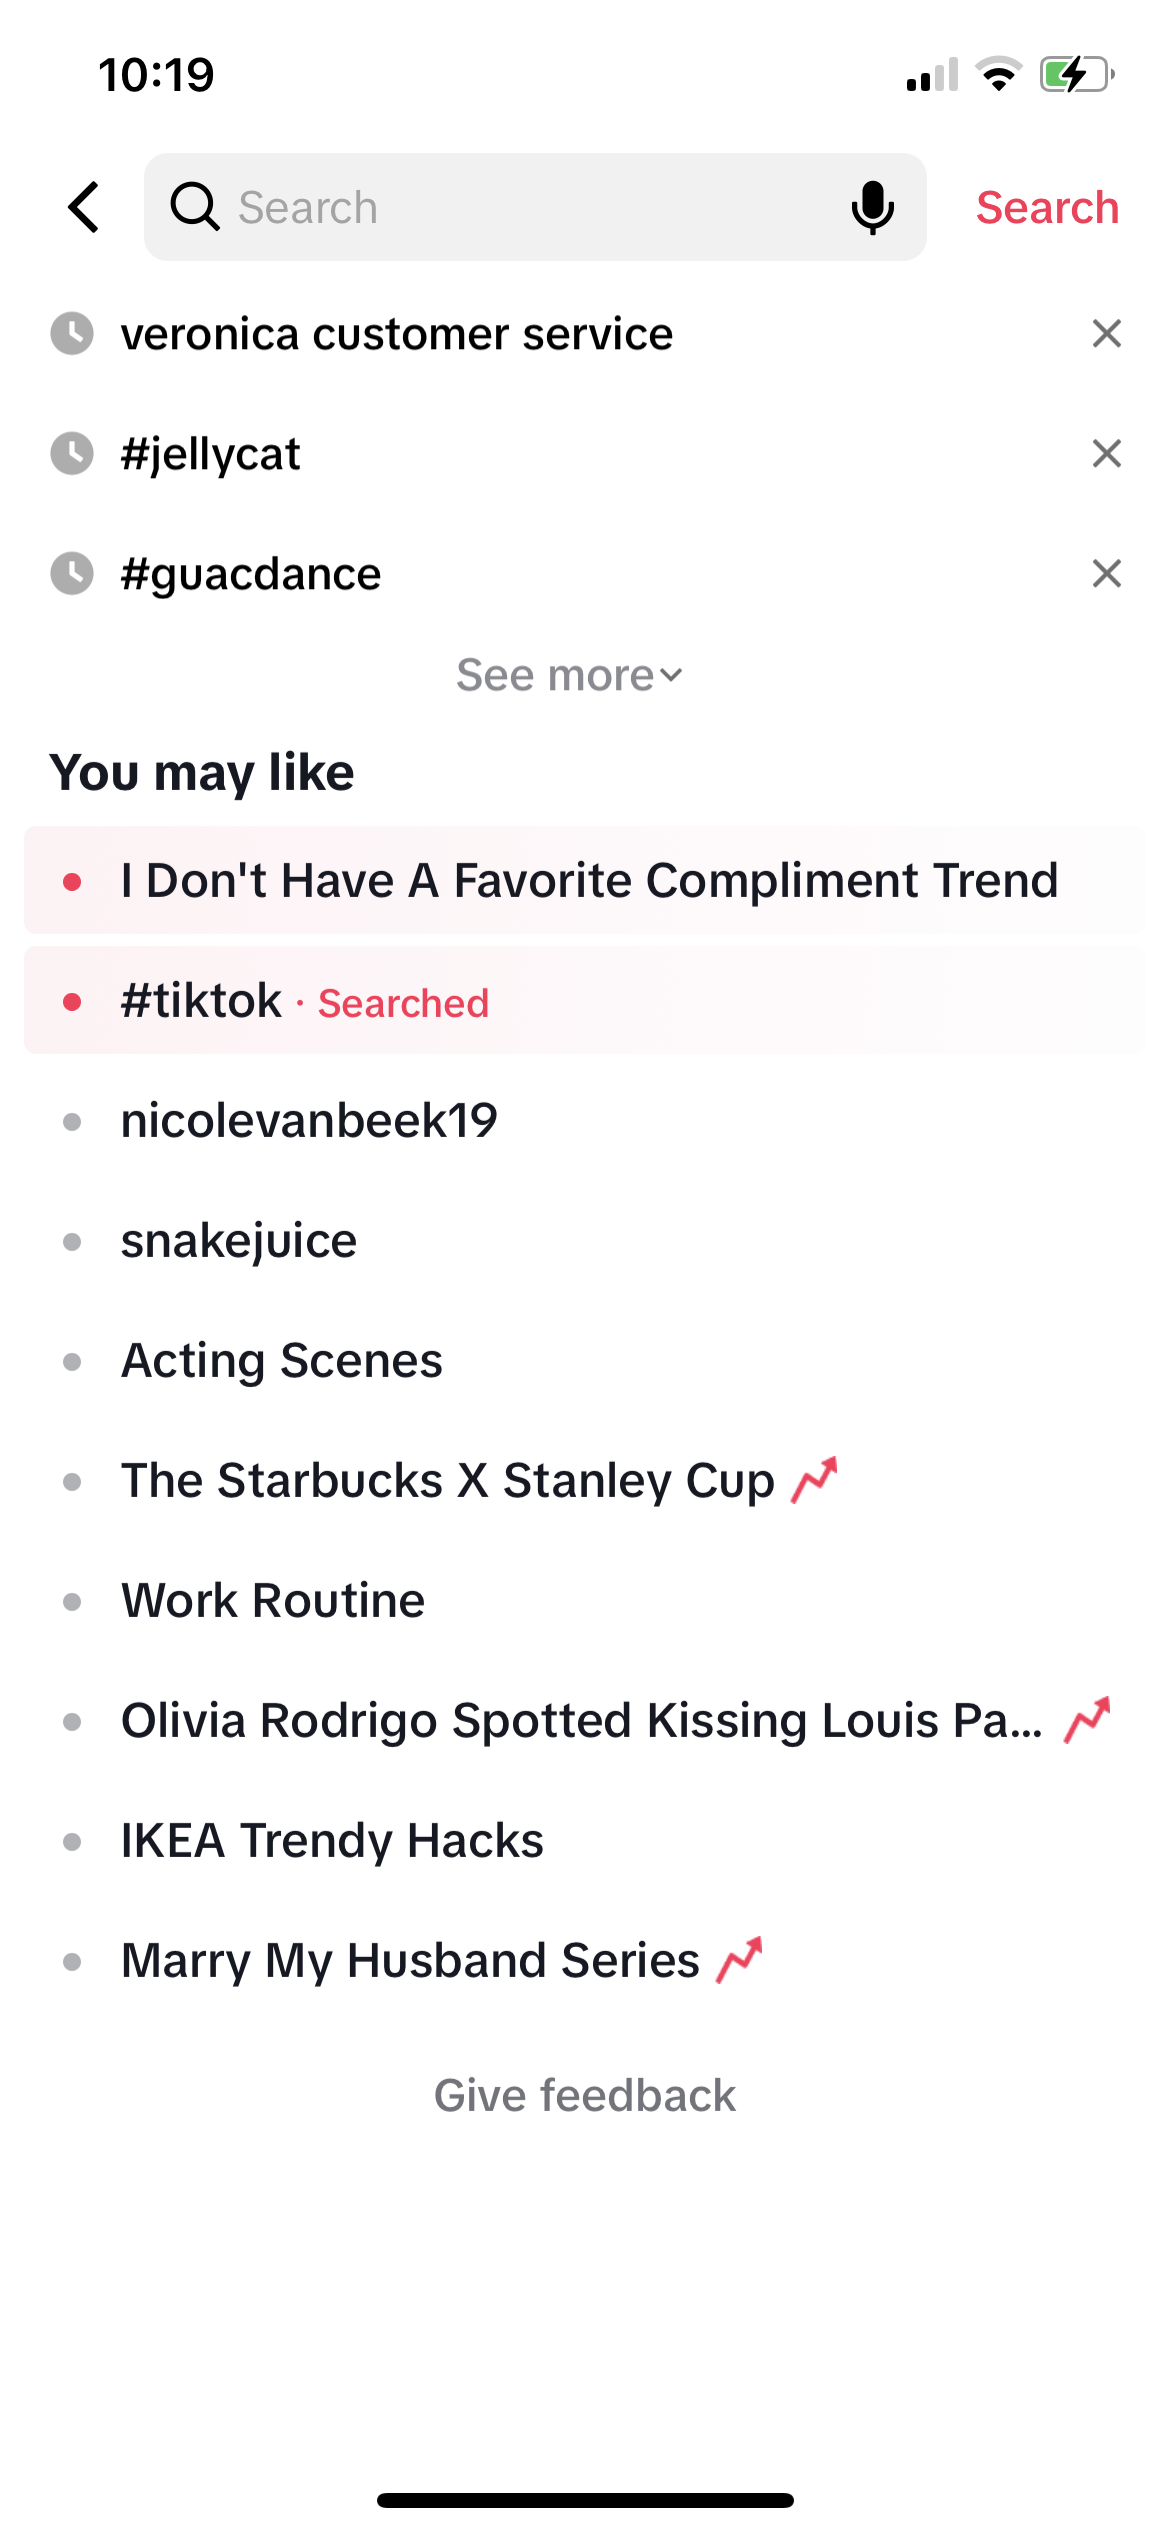 A screenshot of TikTok's search interface, which shows trending topics and hashtags you may be interested in.